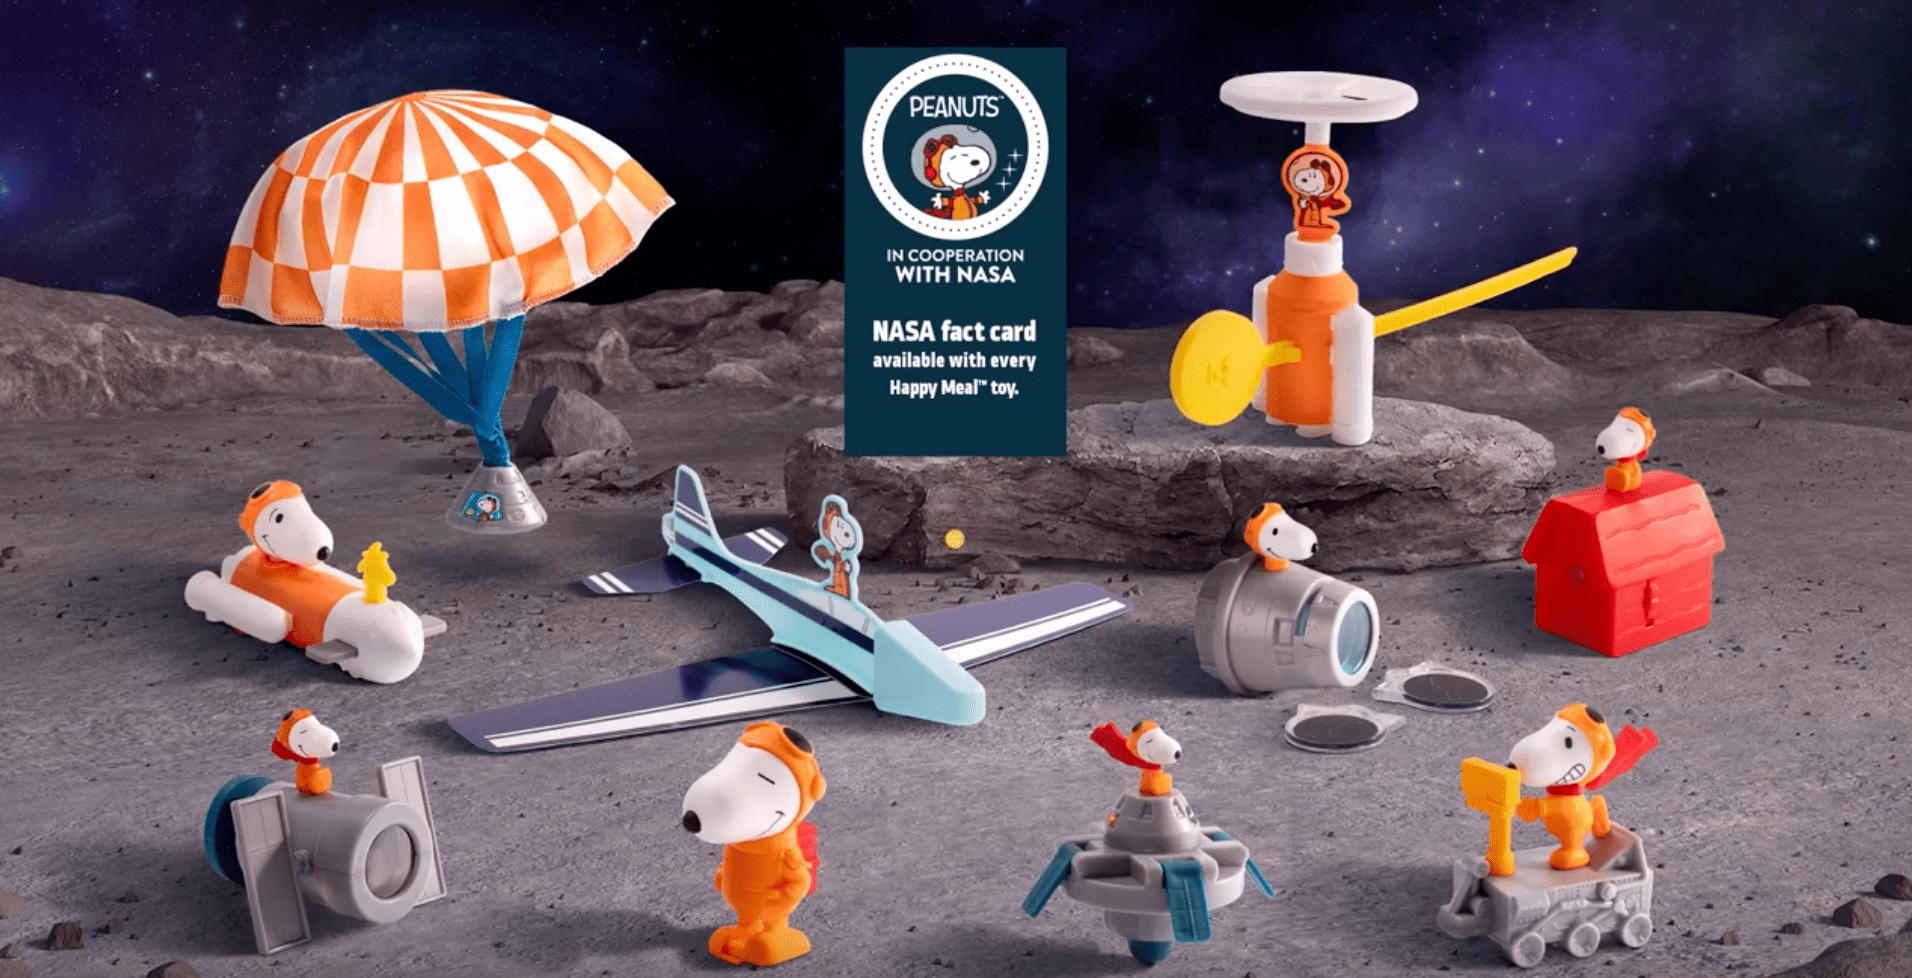 Snoopy Peanuts NASA 2019 Space Plane McDonald's Happy Meal Toy New in Packet 